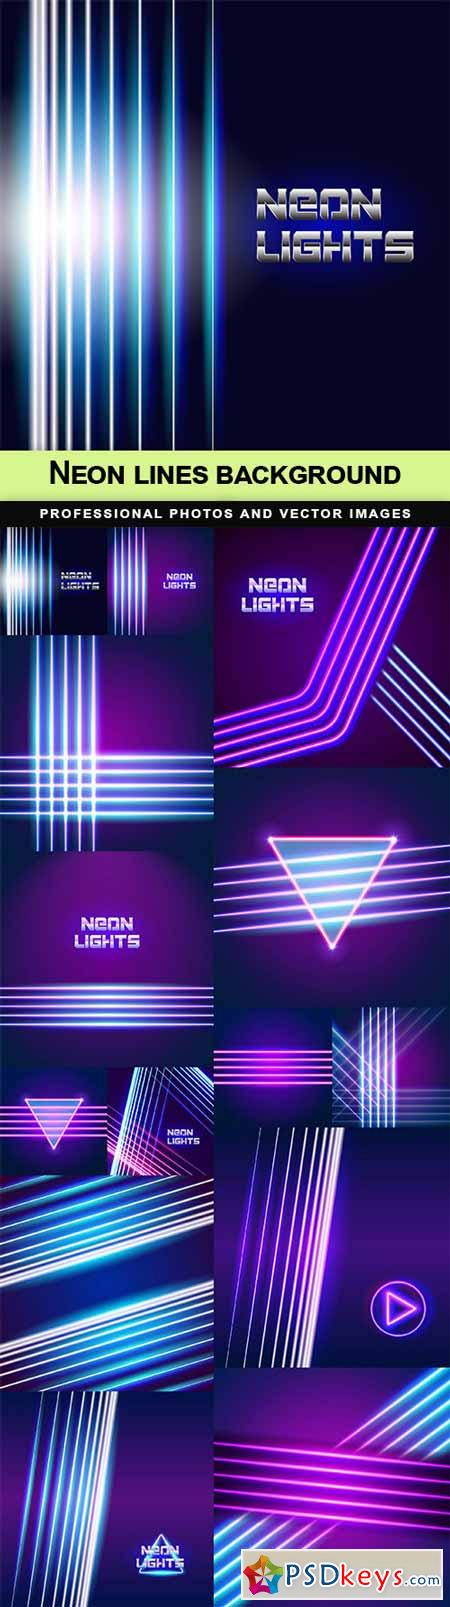 Neon lines background - 14 EPS